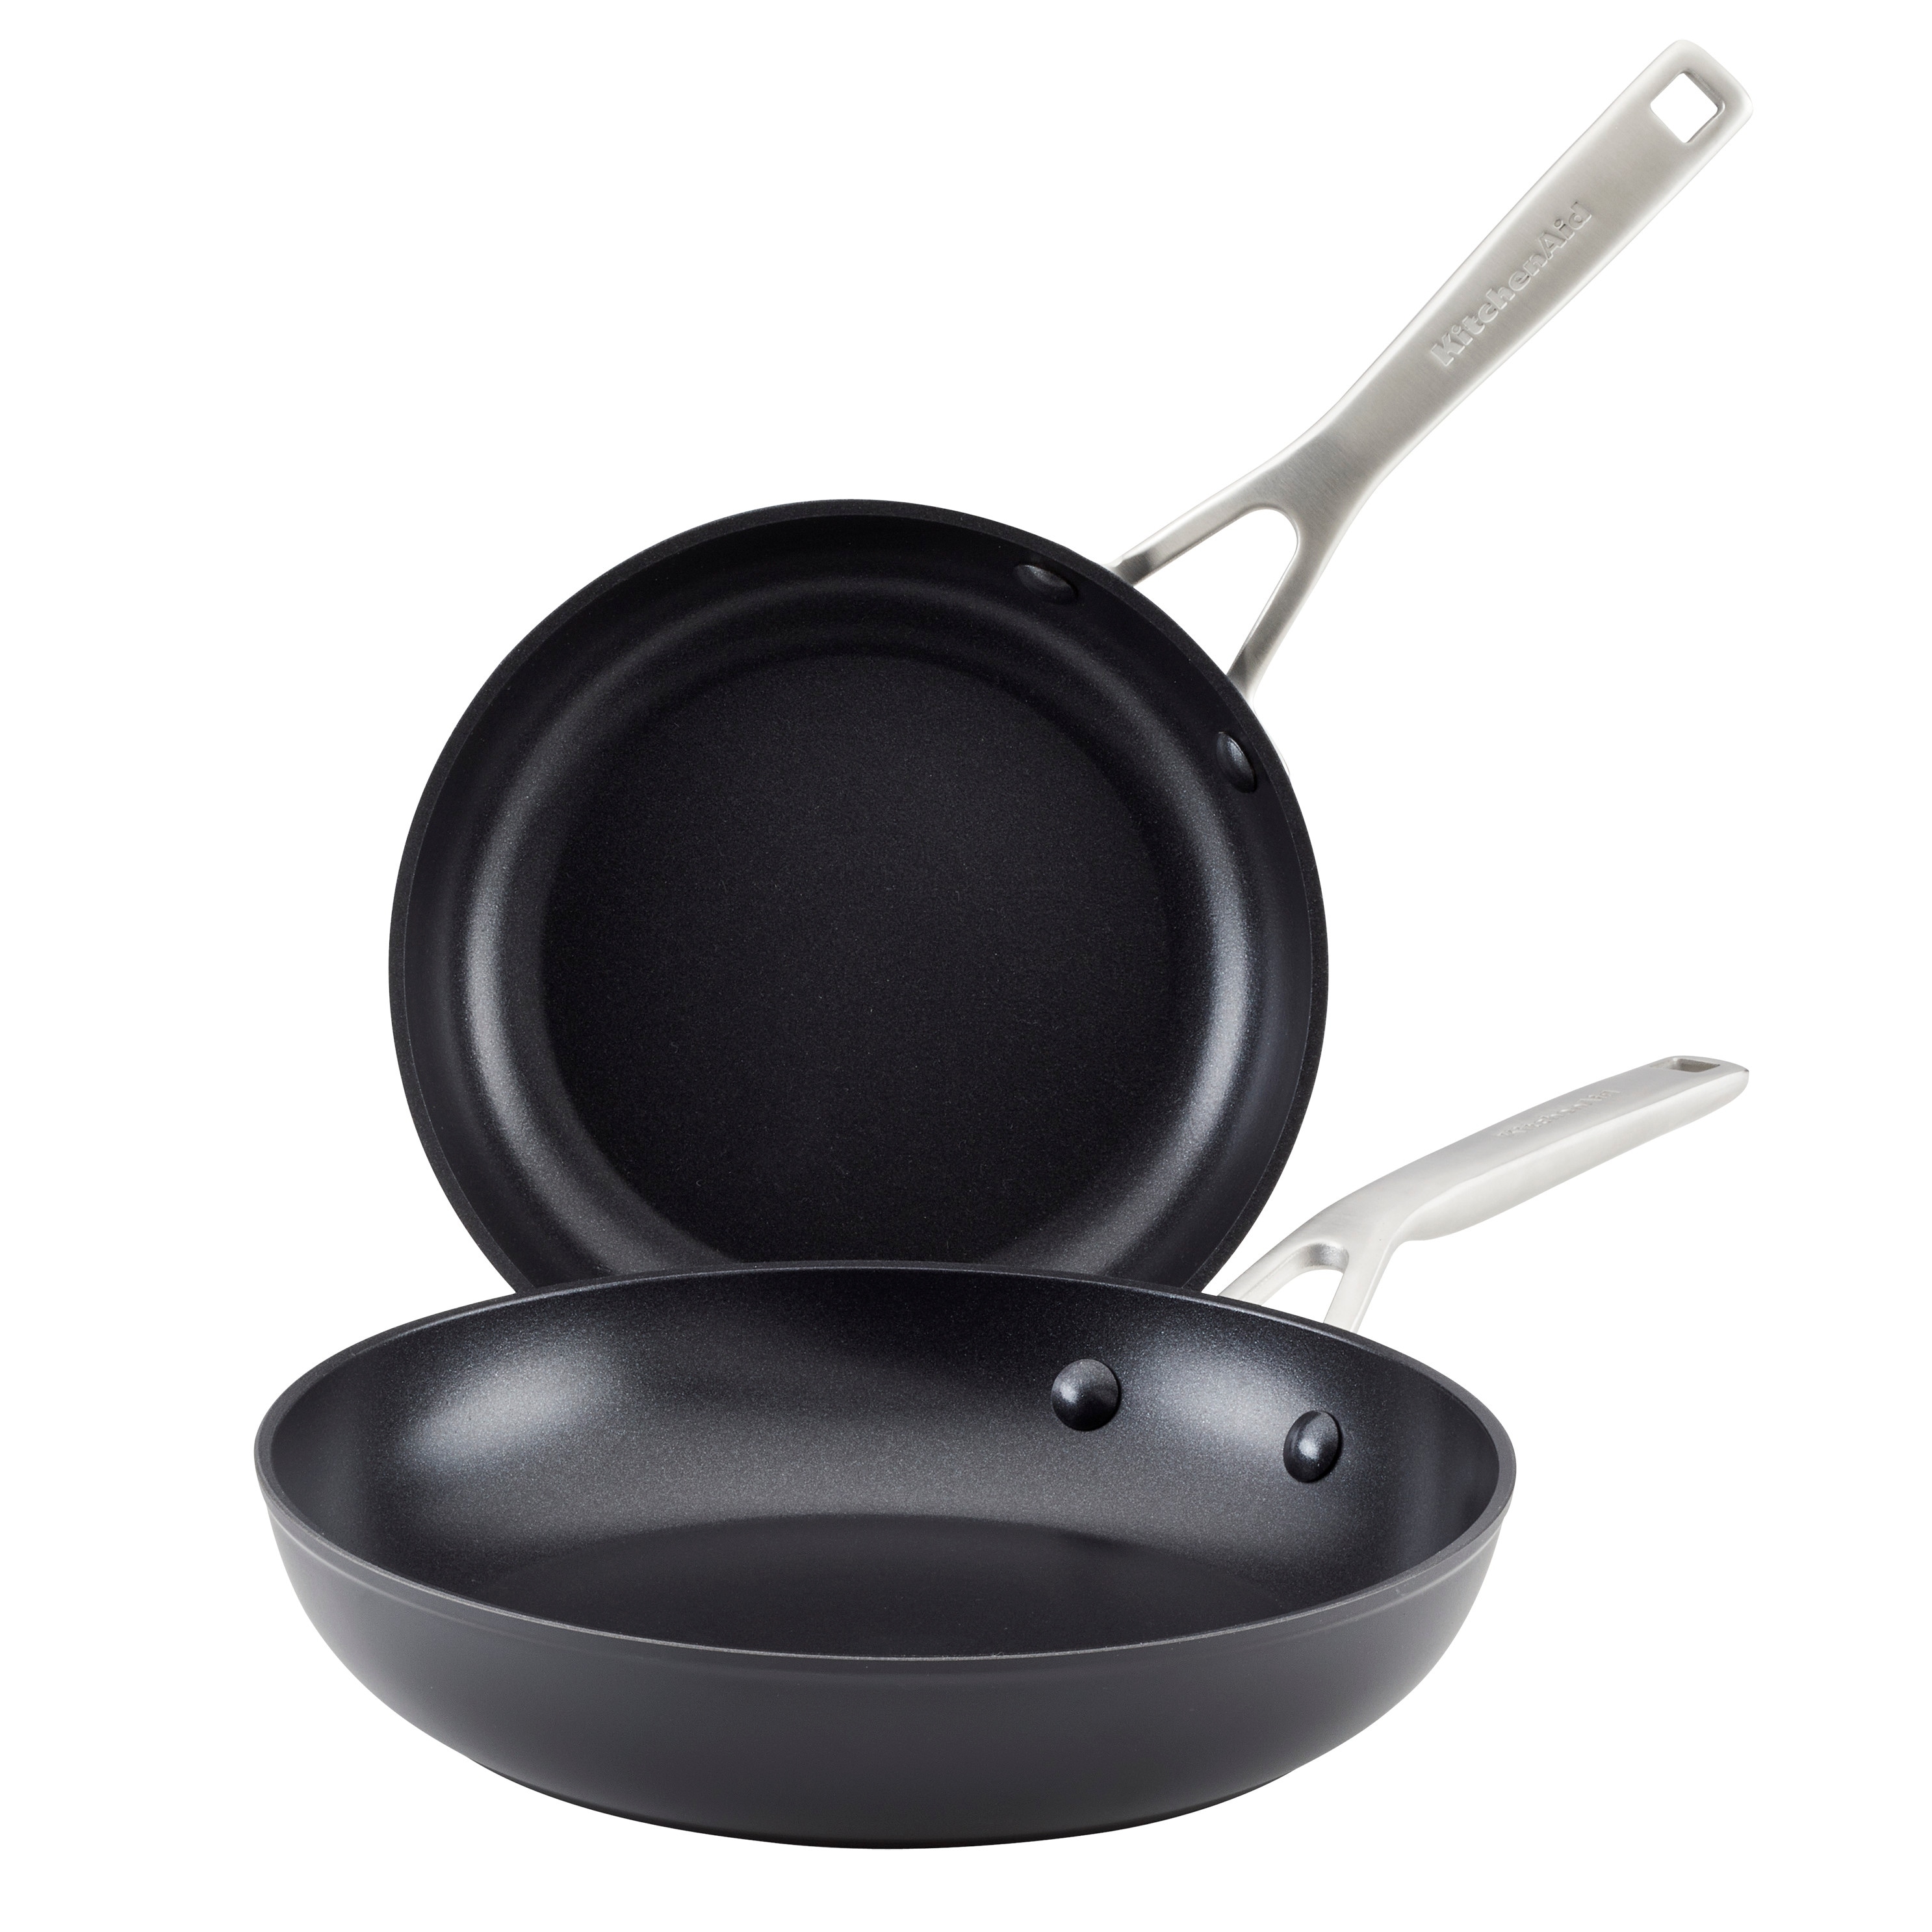 https://ak1.ostkcdn.com/images/products/is/images/direct/52700b75124ffd2d162c2a9531507a010aecdfe5/KitchenAid-Hard-Anodized-Induction-Nonstick-Frying-Pan-Set%2C-2-Piece%2C-Matte-Black.jpg